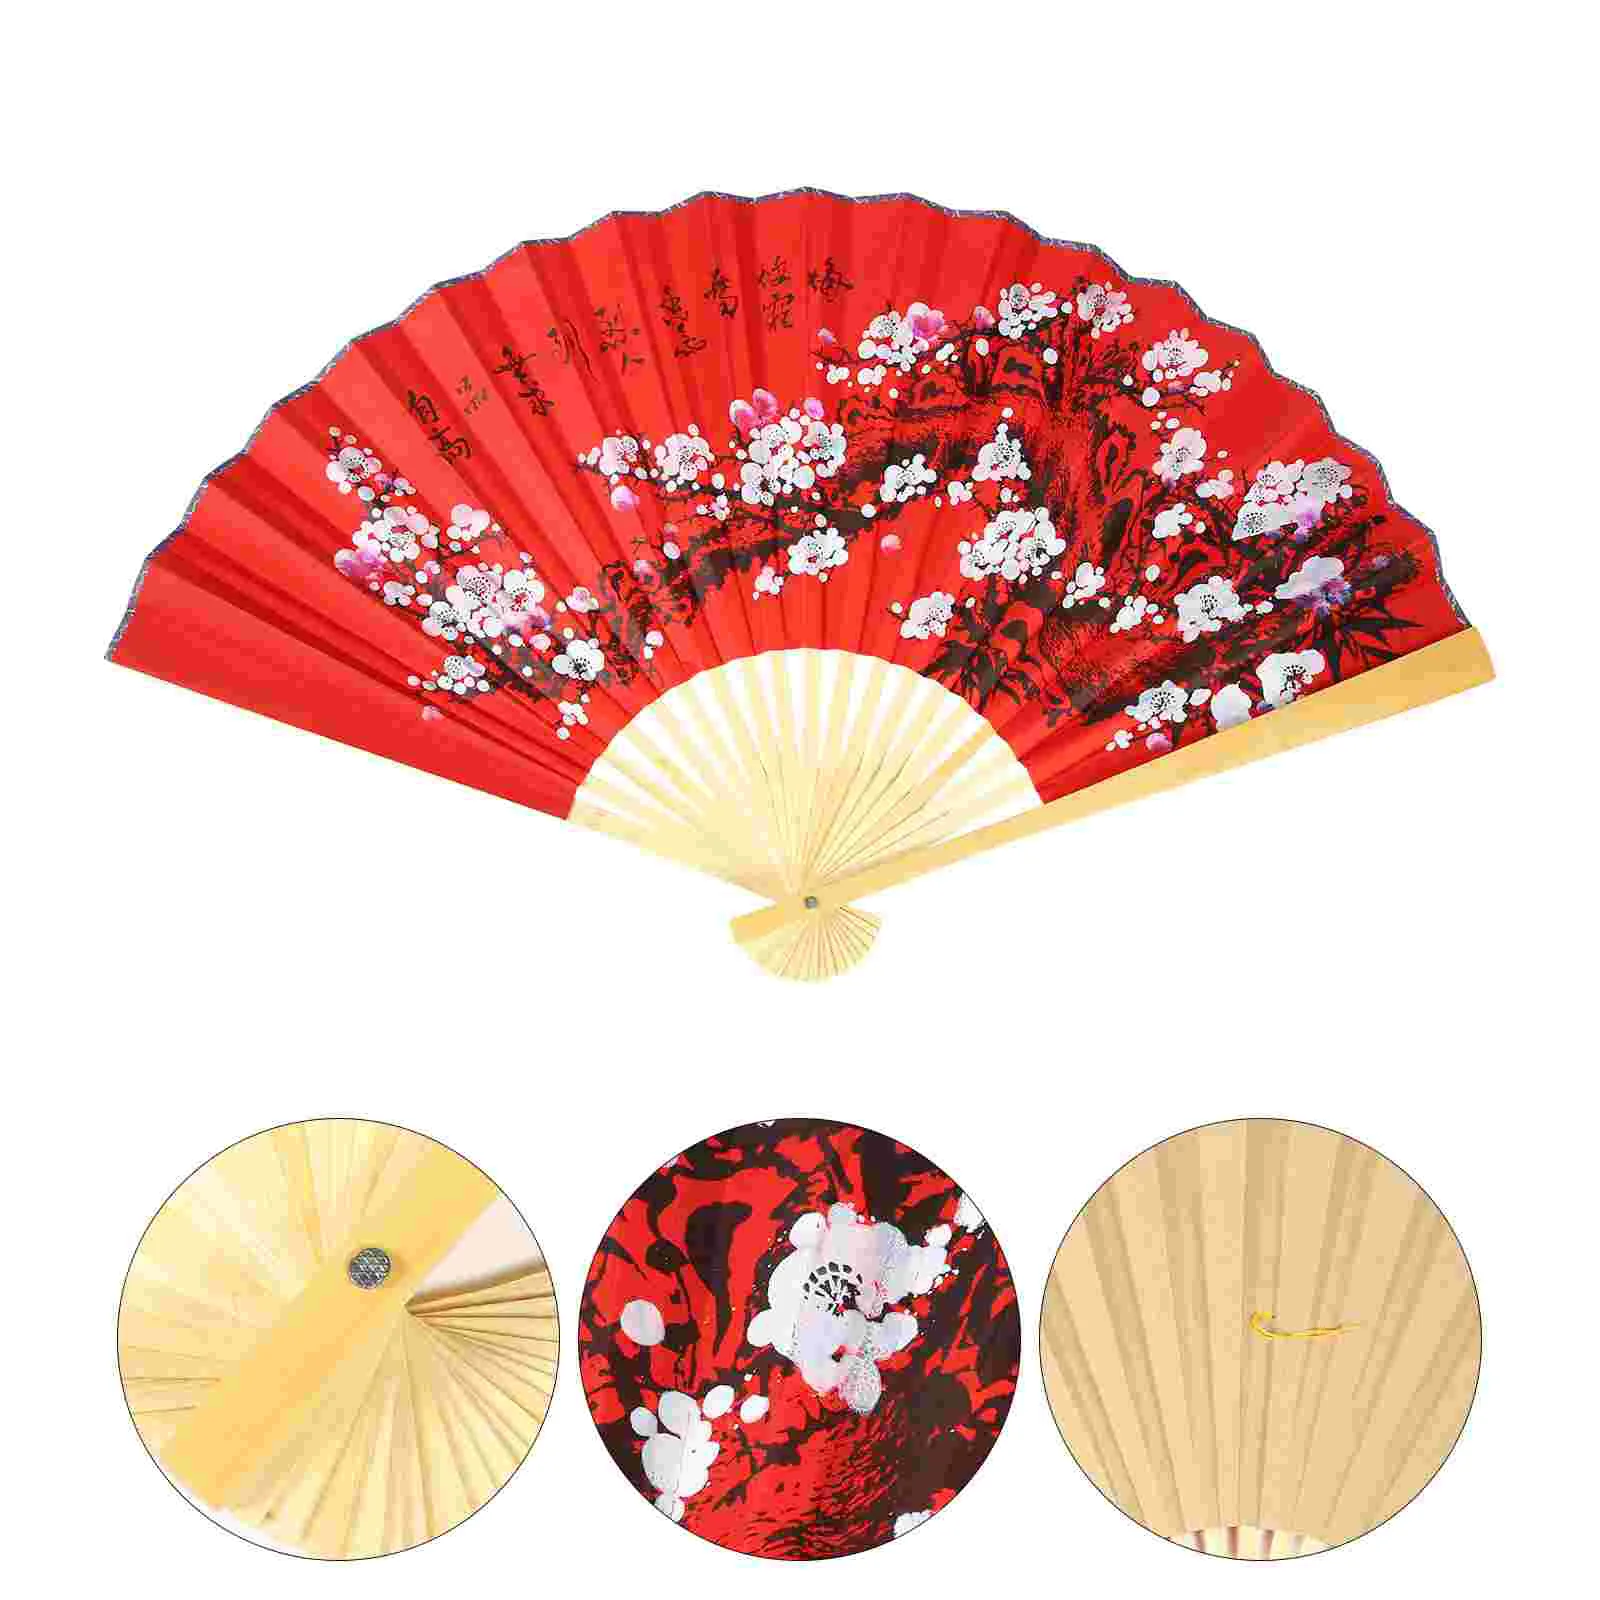 

Hand Fan Chinese Japanese Handheld Paper Oriental Wall Giant Bamboo Kung Fu Asian Decor Wedding Birthday Party